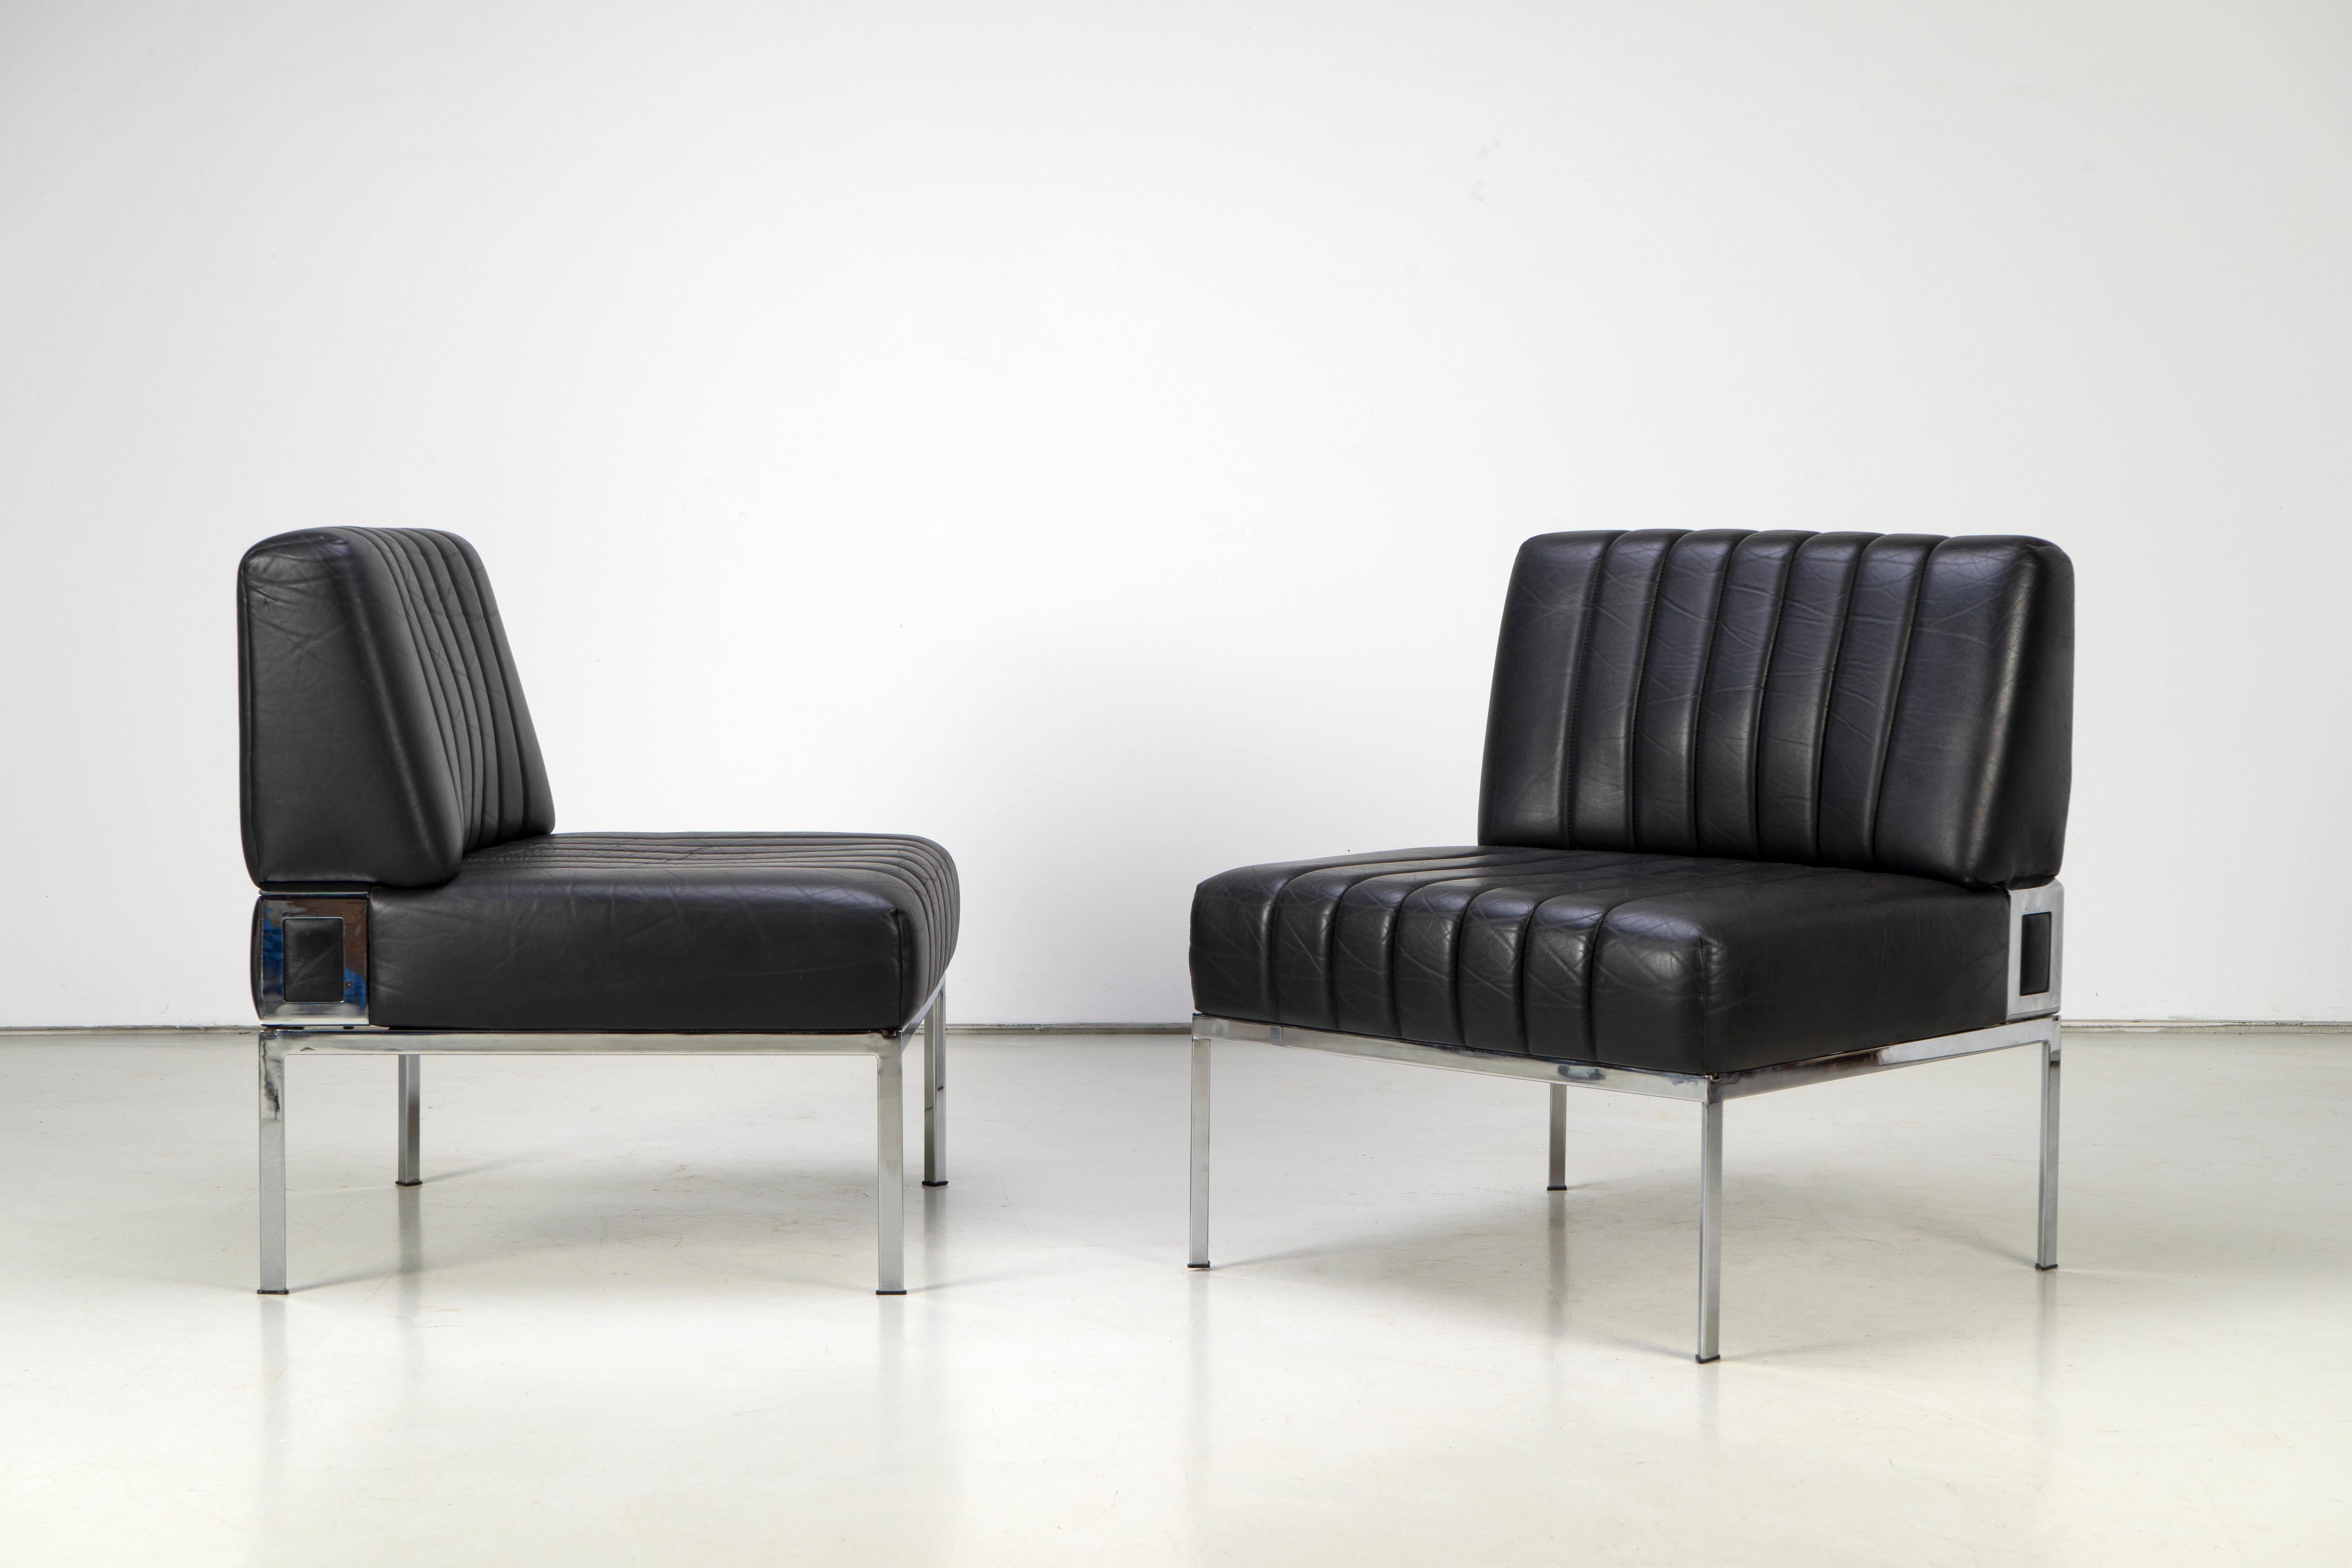 Four Mid-Century-Modern lounge chairs with black leather and chrome frames. The chairs were produced by the German company Stoll Giroflex in the 1970s and are in very good condition. They are available individually or as a set.